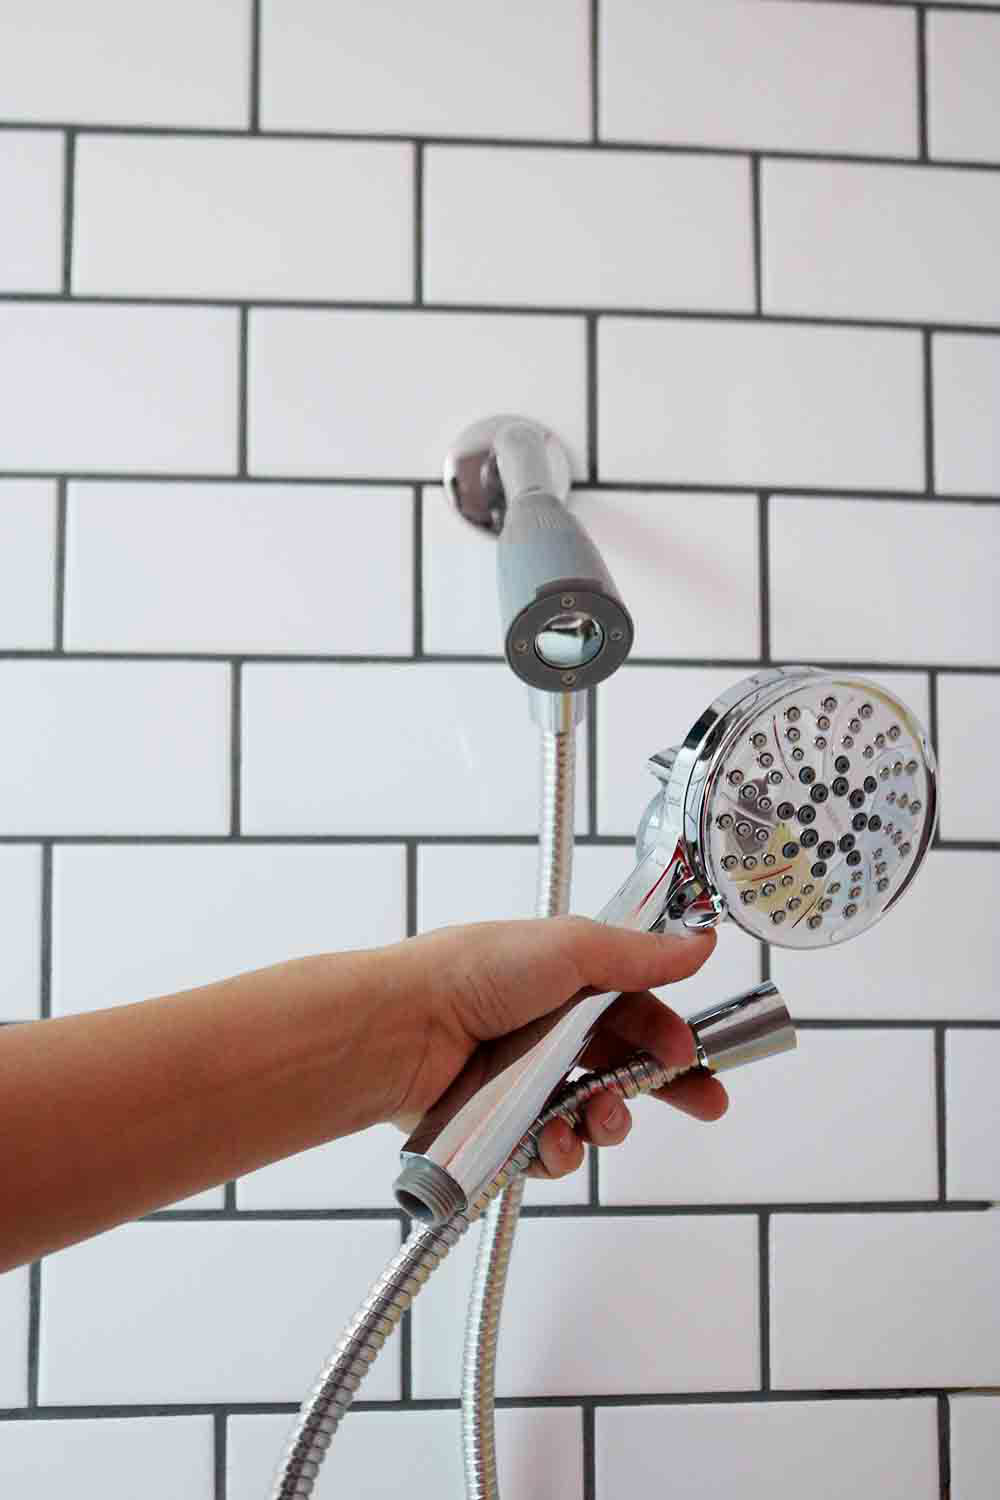 A person attaching a shower head onto a wall.